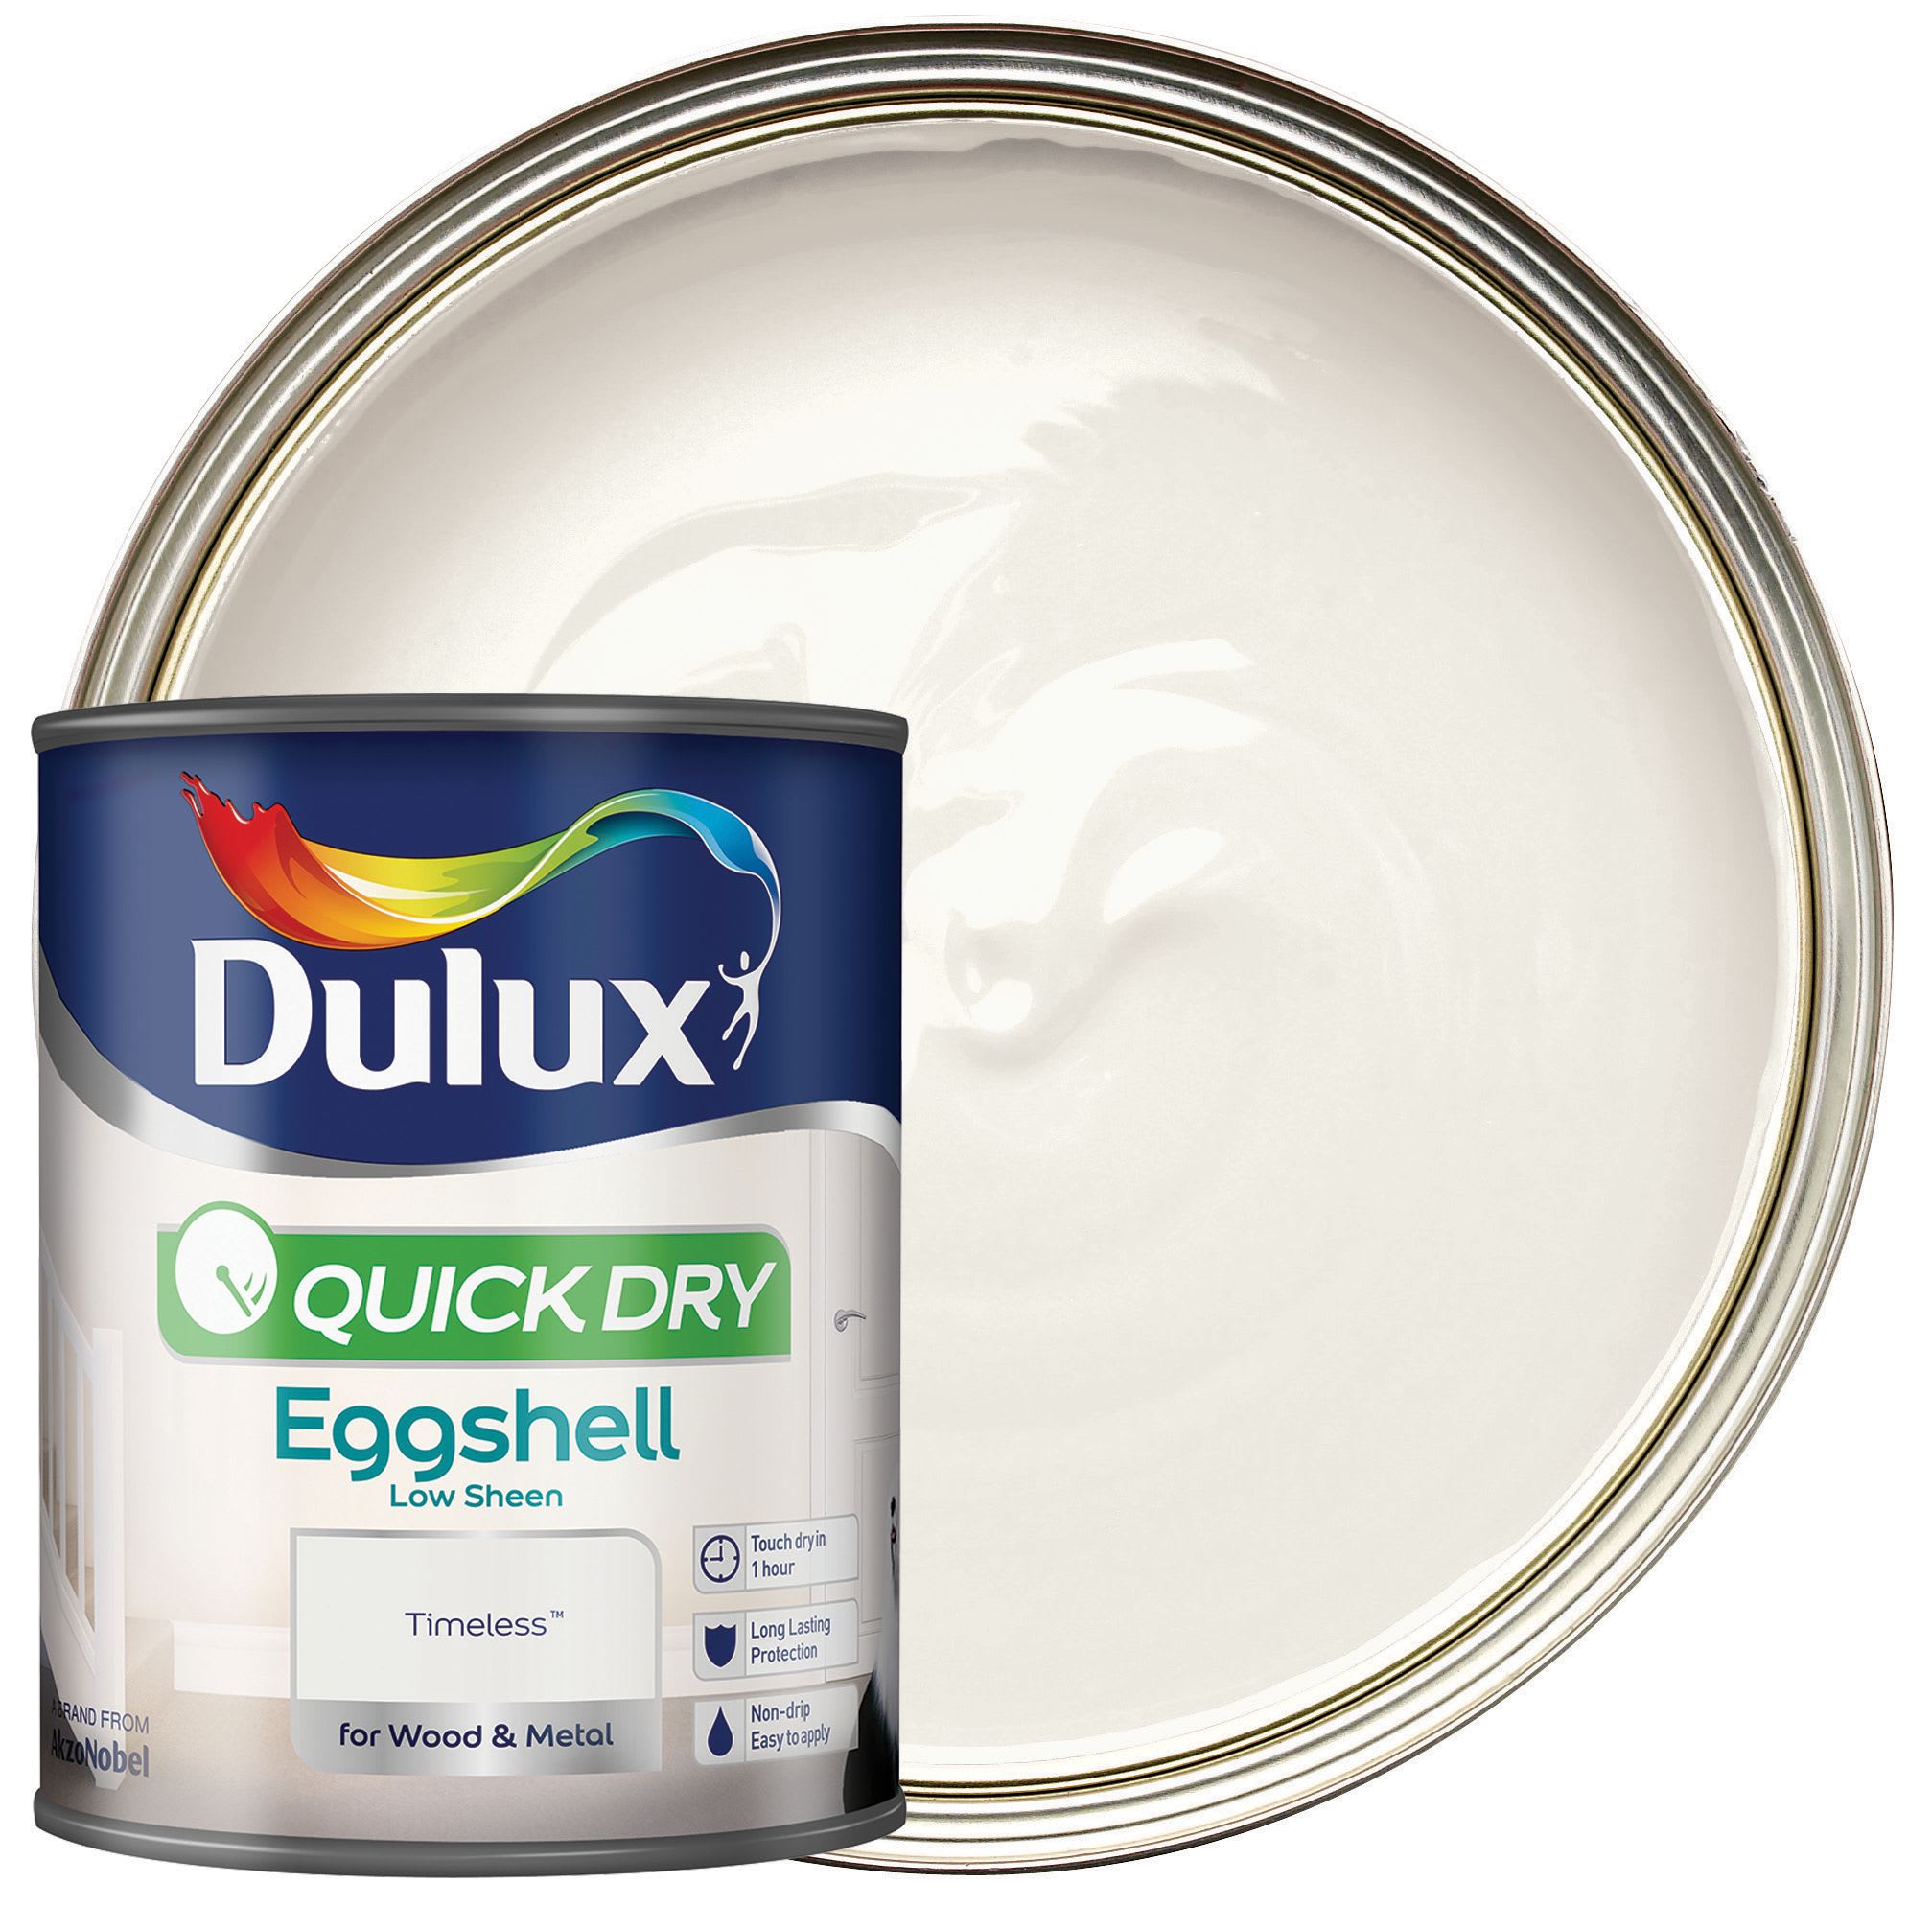 Dulux Quick Dry Eggshell Paint - Timeless -